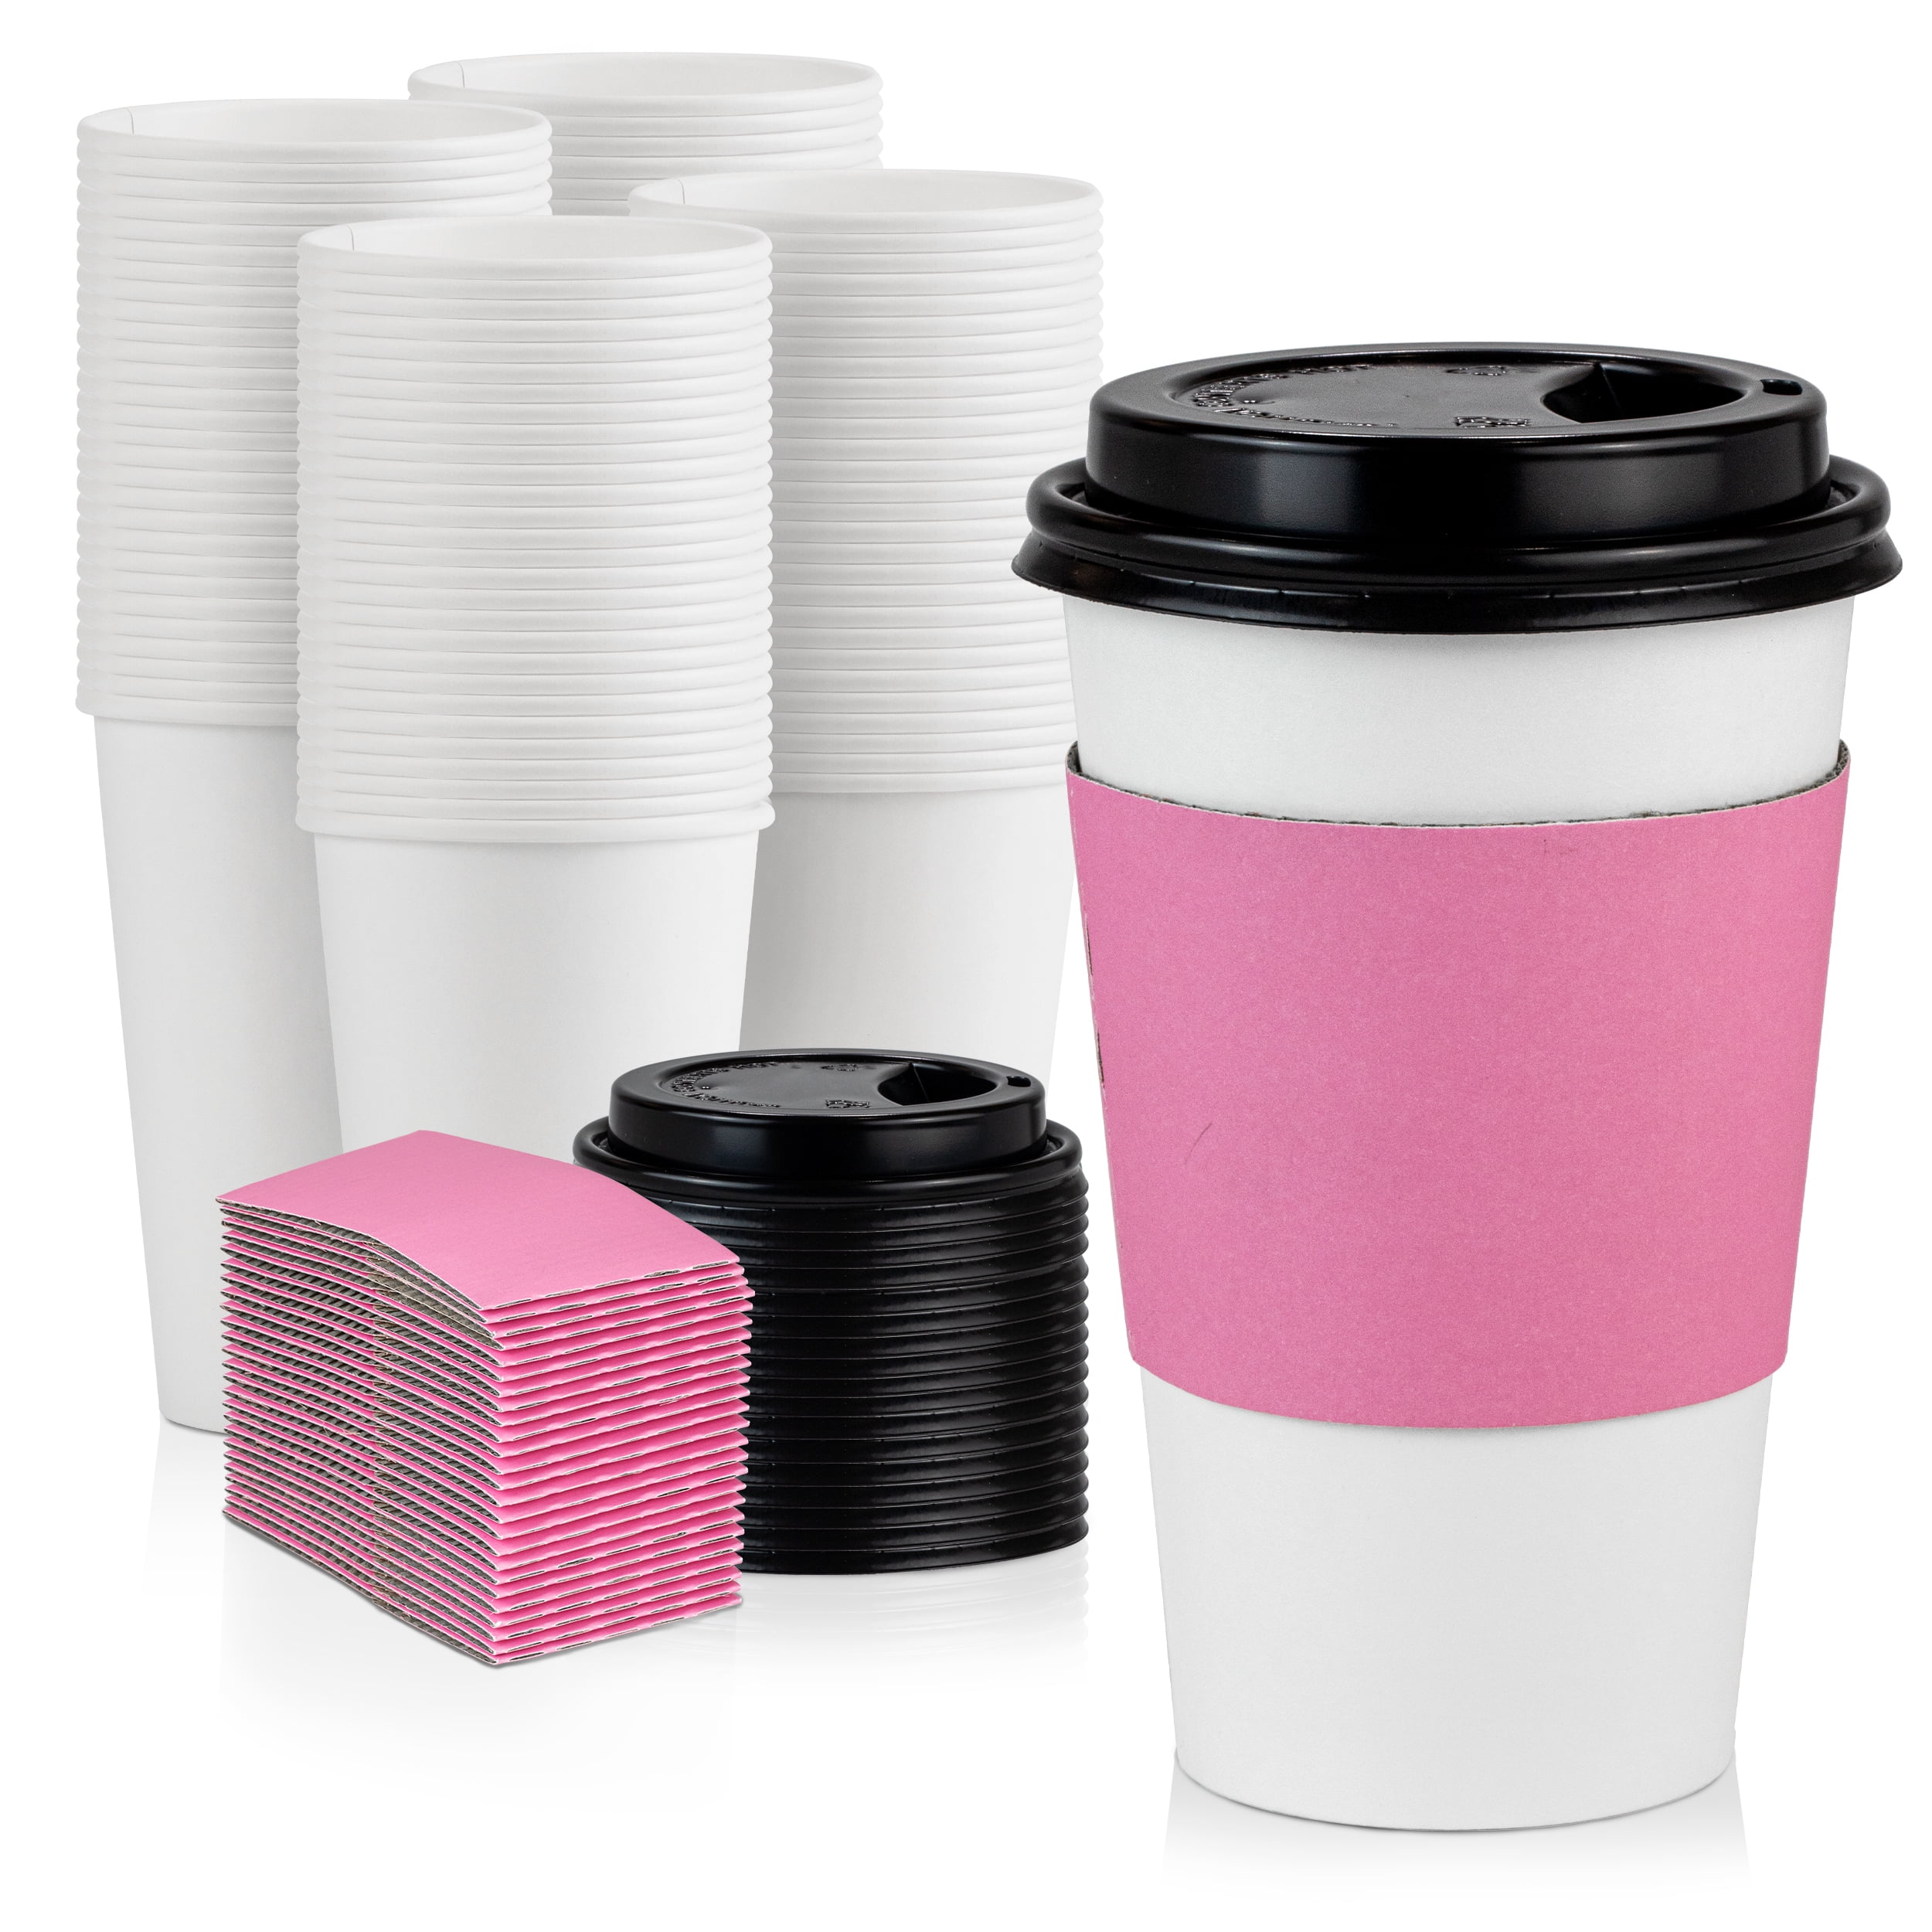 SINGLE WALL PAPER CUPS 500 x 8oz 12oz WHITE FOR COFFEE TE HOT COLD DRINKS & LIDS